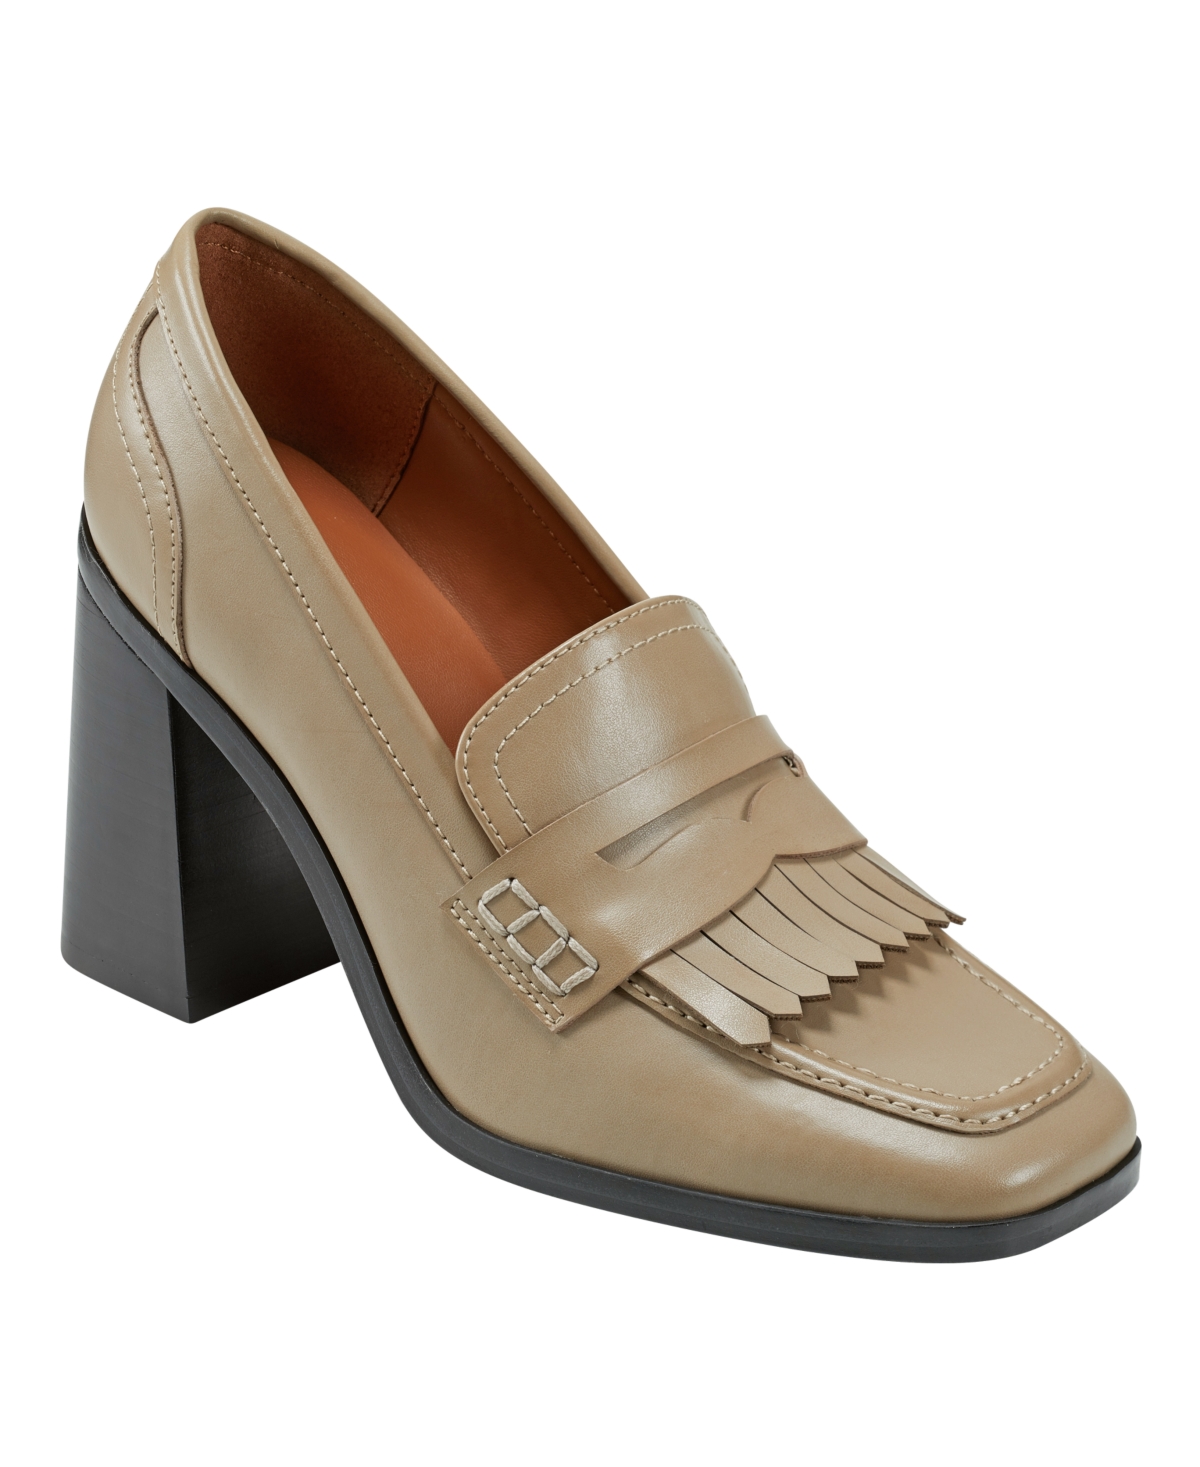 Women's Hamish Block Heel Square Toe Dress Loafers - Taupe